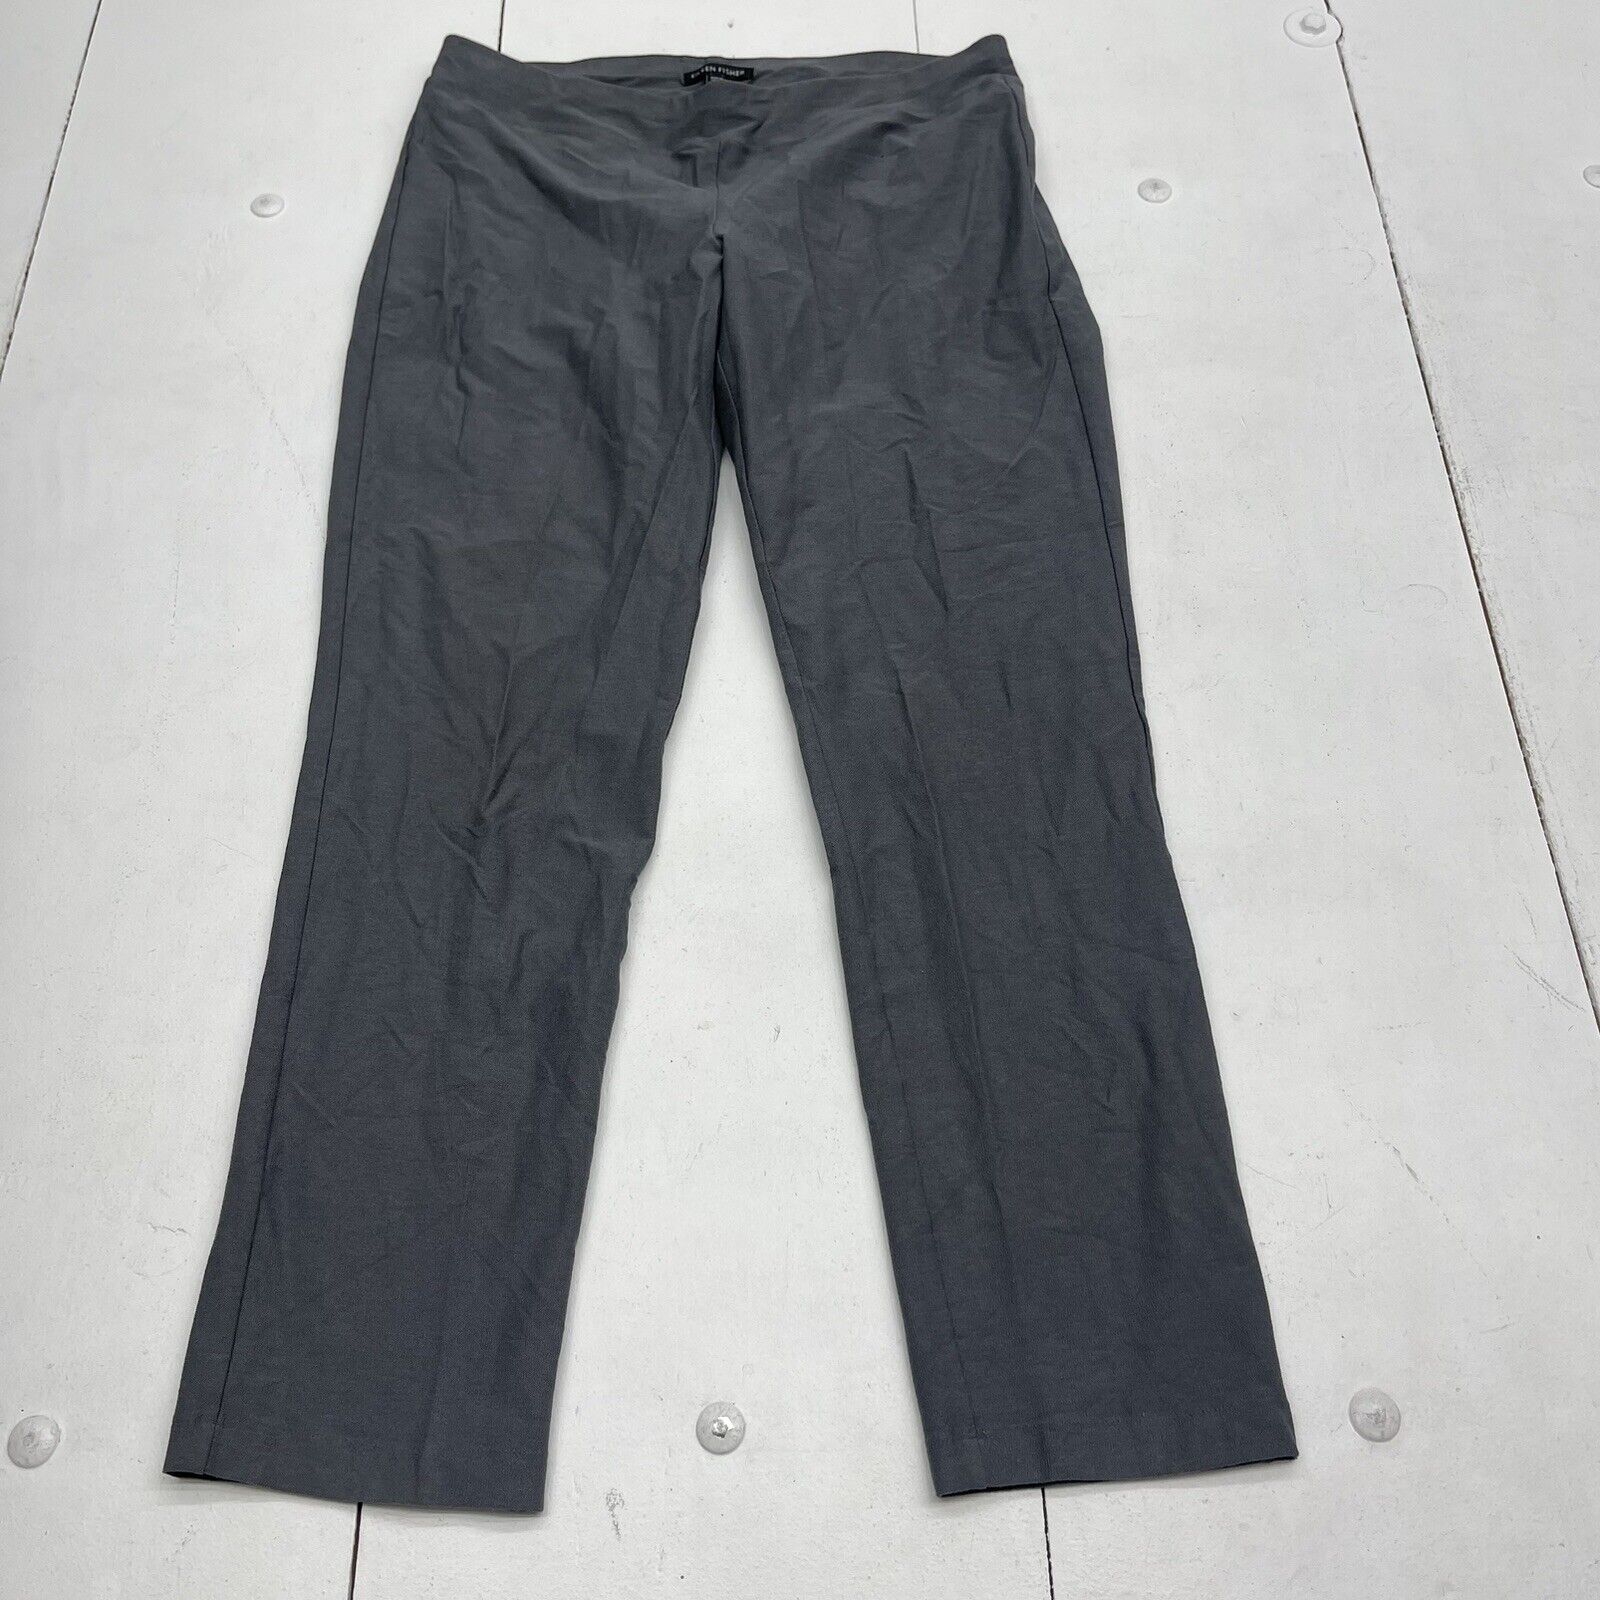 Eileen Fisher Grey Stretch Crepe Slim Ankle Pants Women's Size Small -  beyond exchange